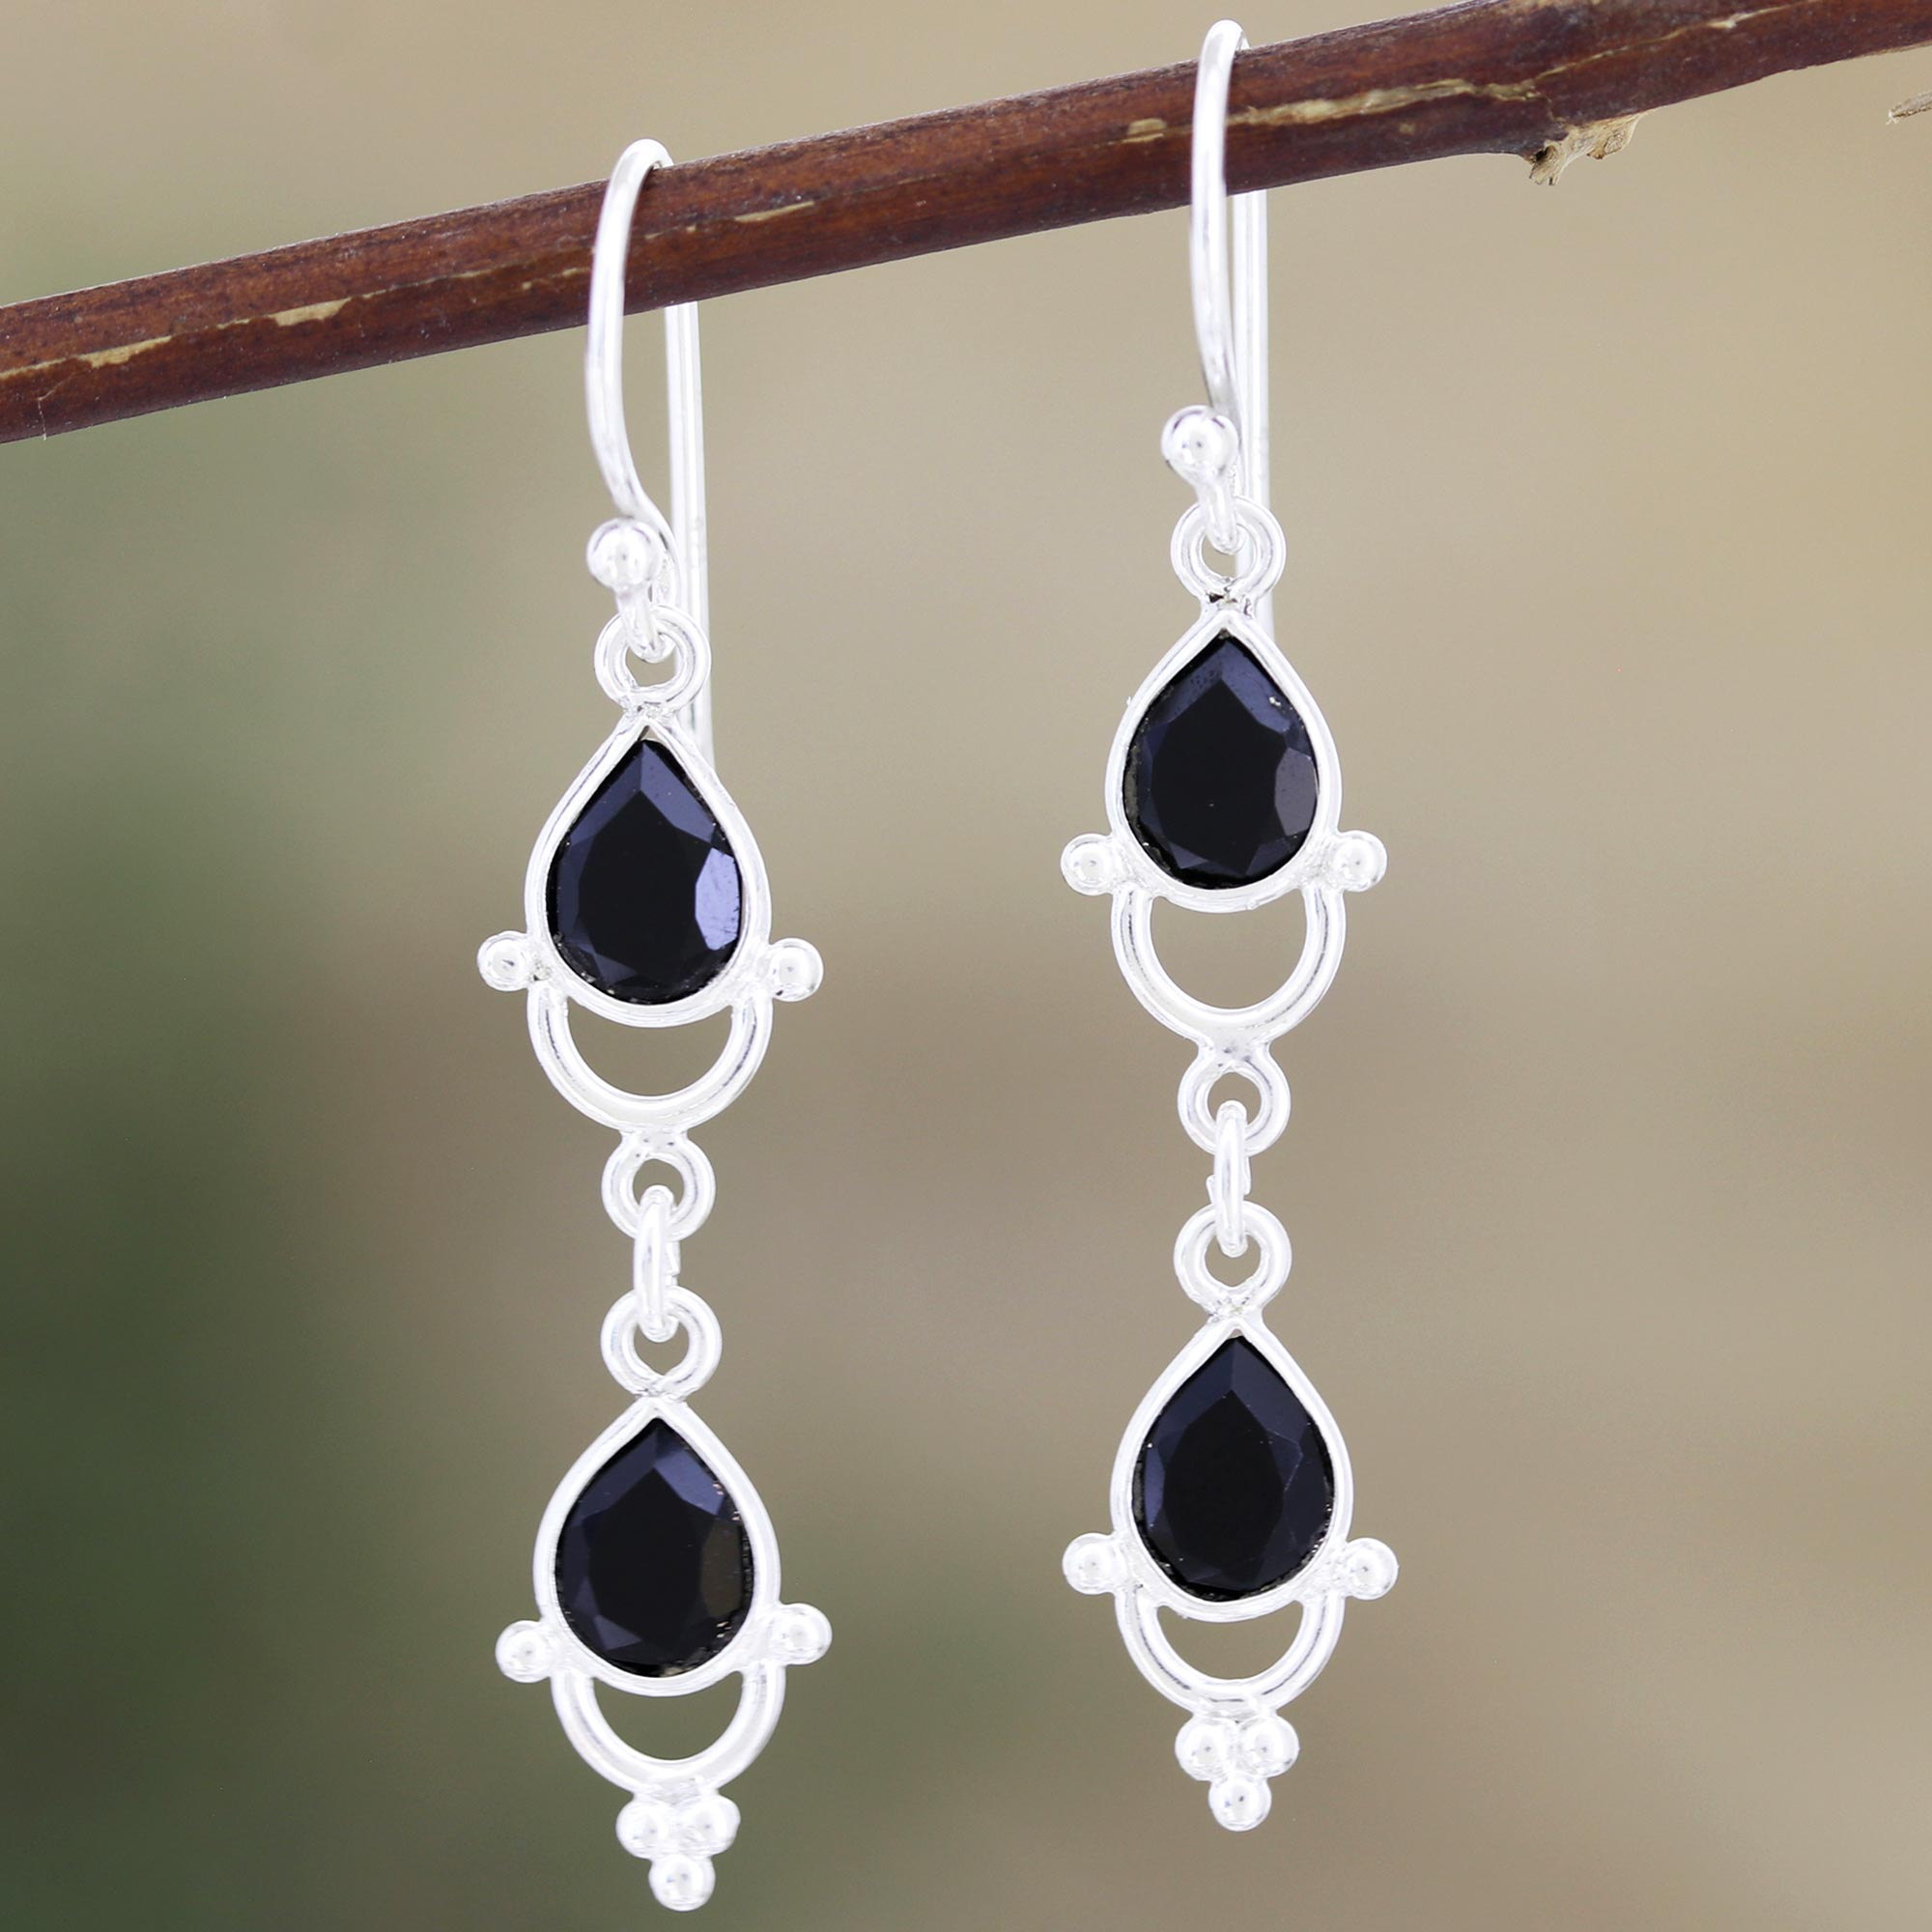 Details about   Handmade in 925 Sterling Silver Green Onyx Tear Drop Earrings With Gift Bag